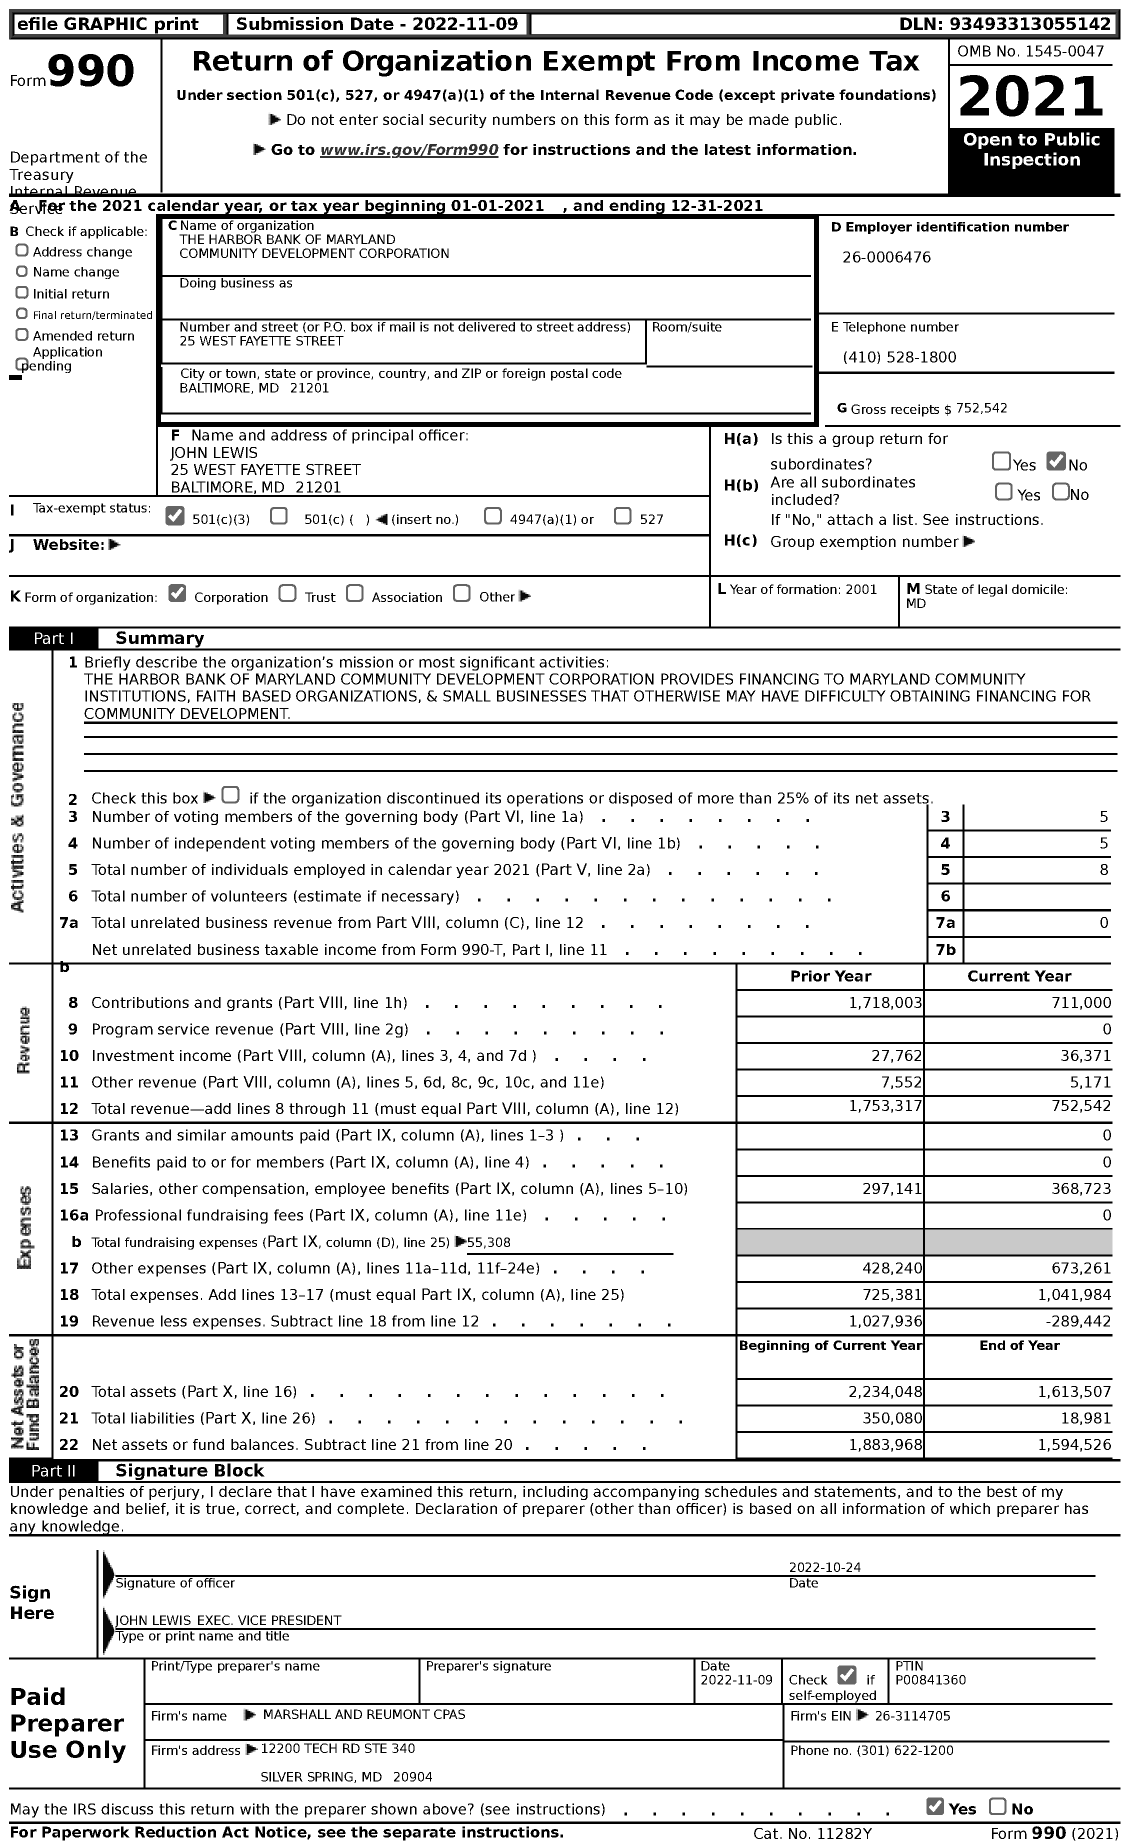 Image of first page of 2021 Form 990 for The Harbor Bank of Maryland Community Development Corporation